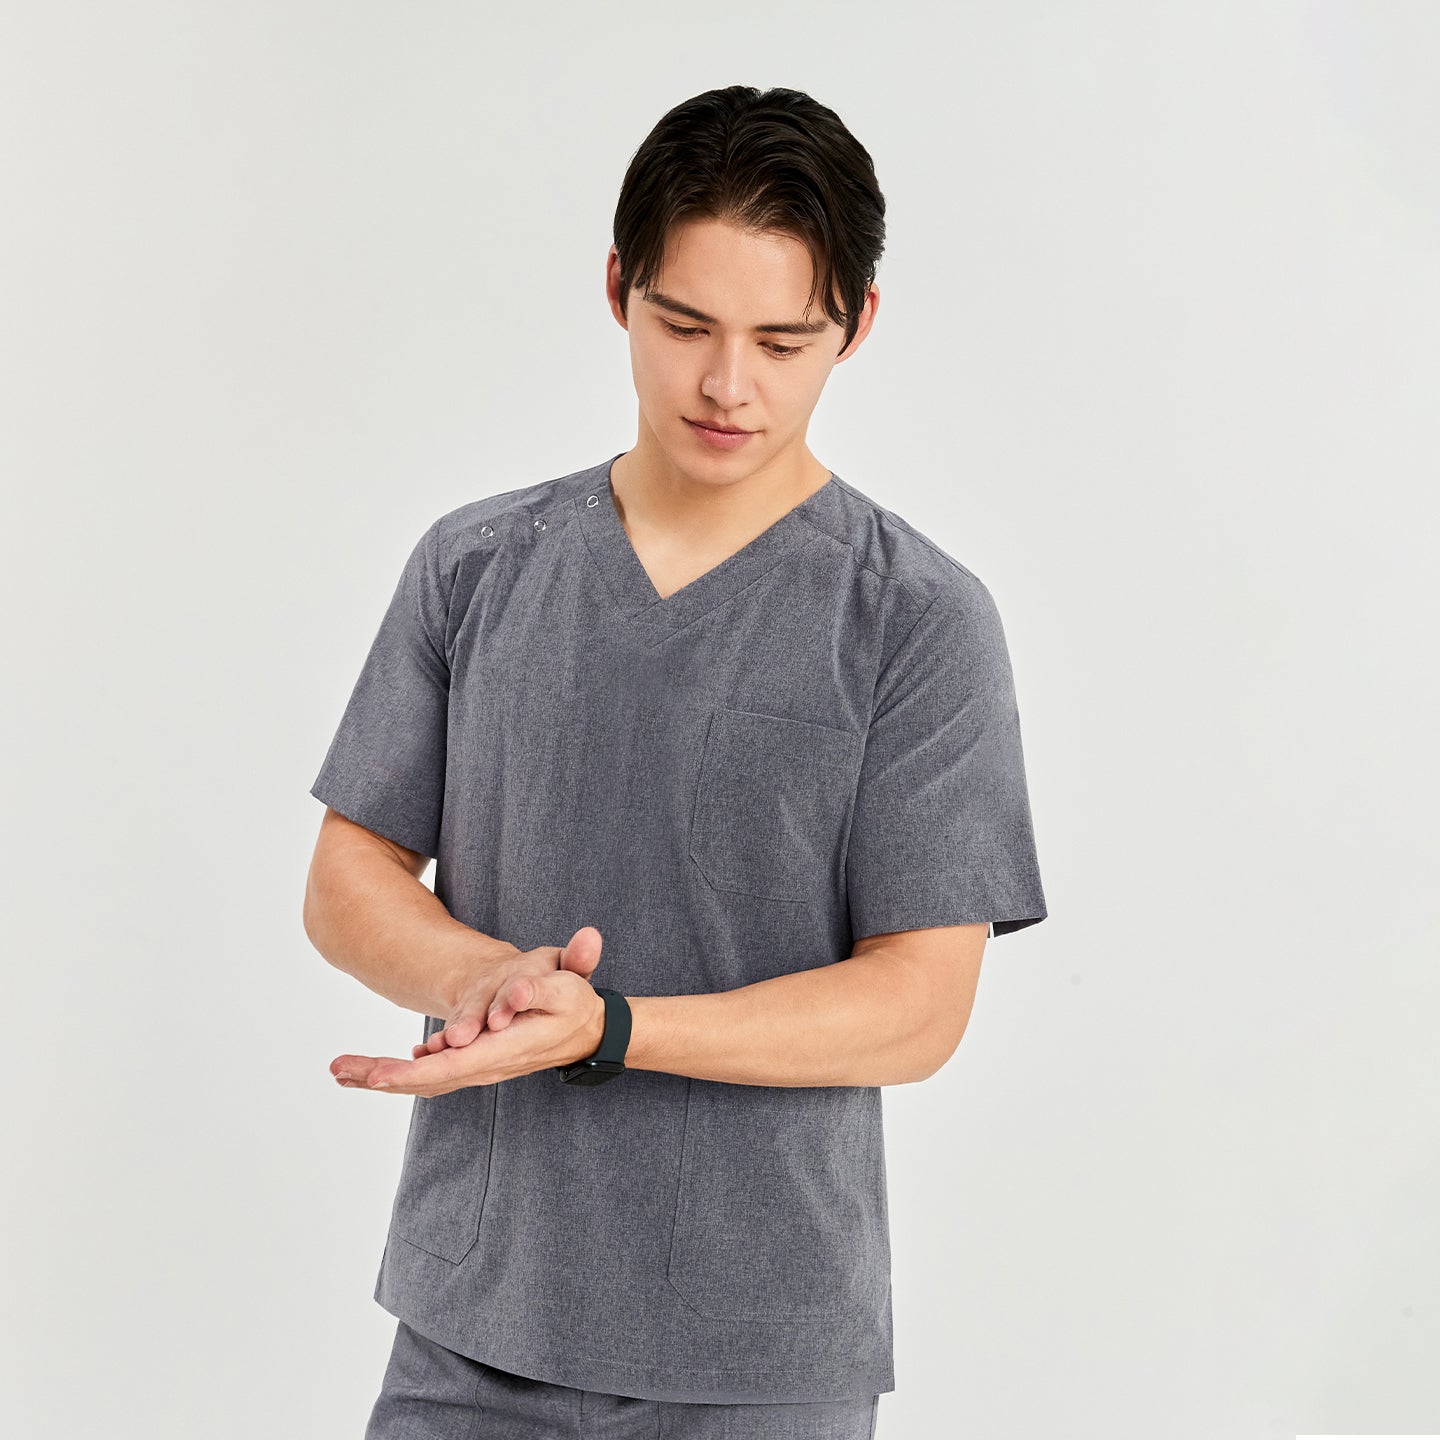 A man wearing a soft gray scrub top, standing and rubbing his hands together against a plain background,Soft Gray